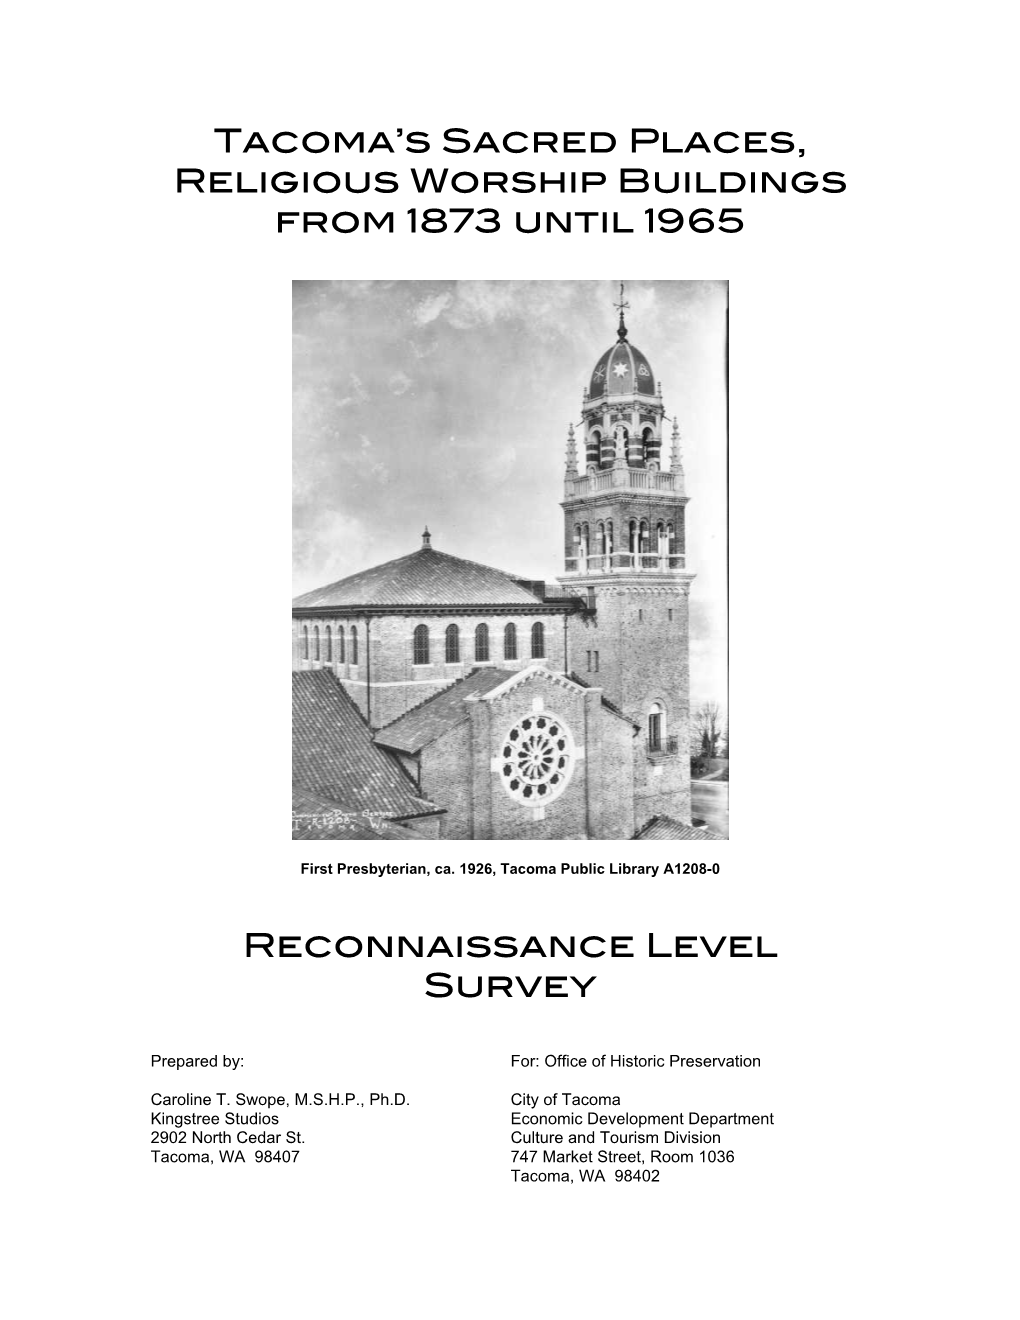 Tacoma's Sacred Places, Religious Worship Buildings from 1873 Until